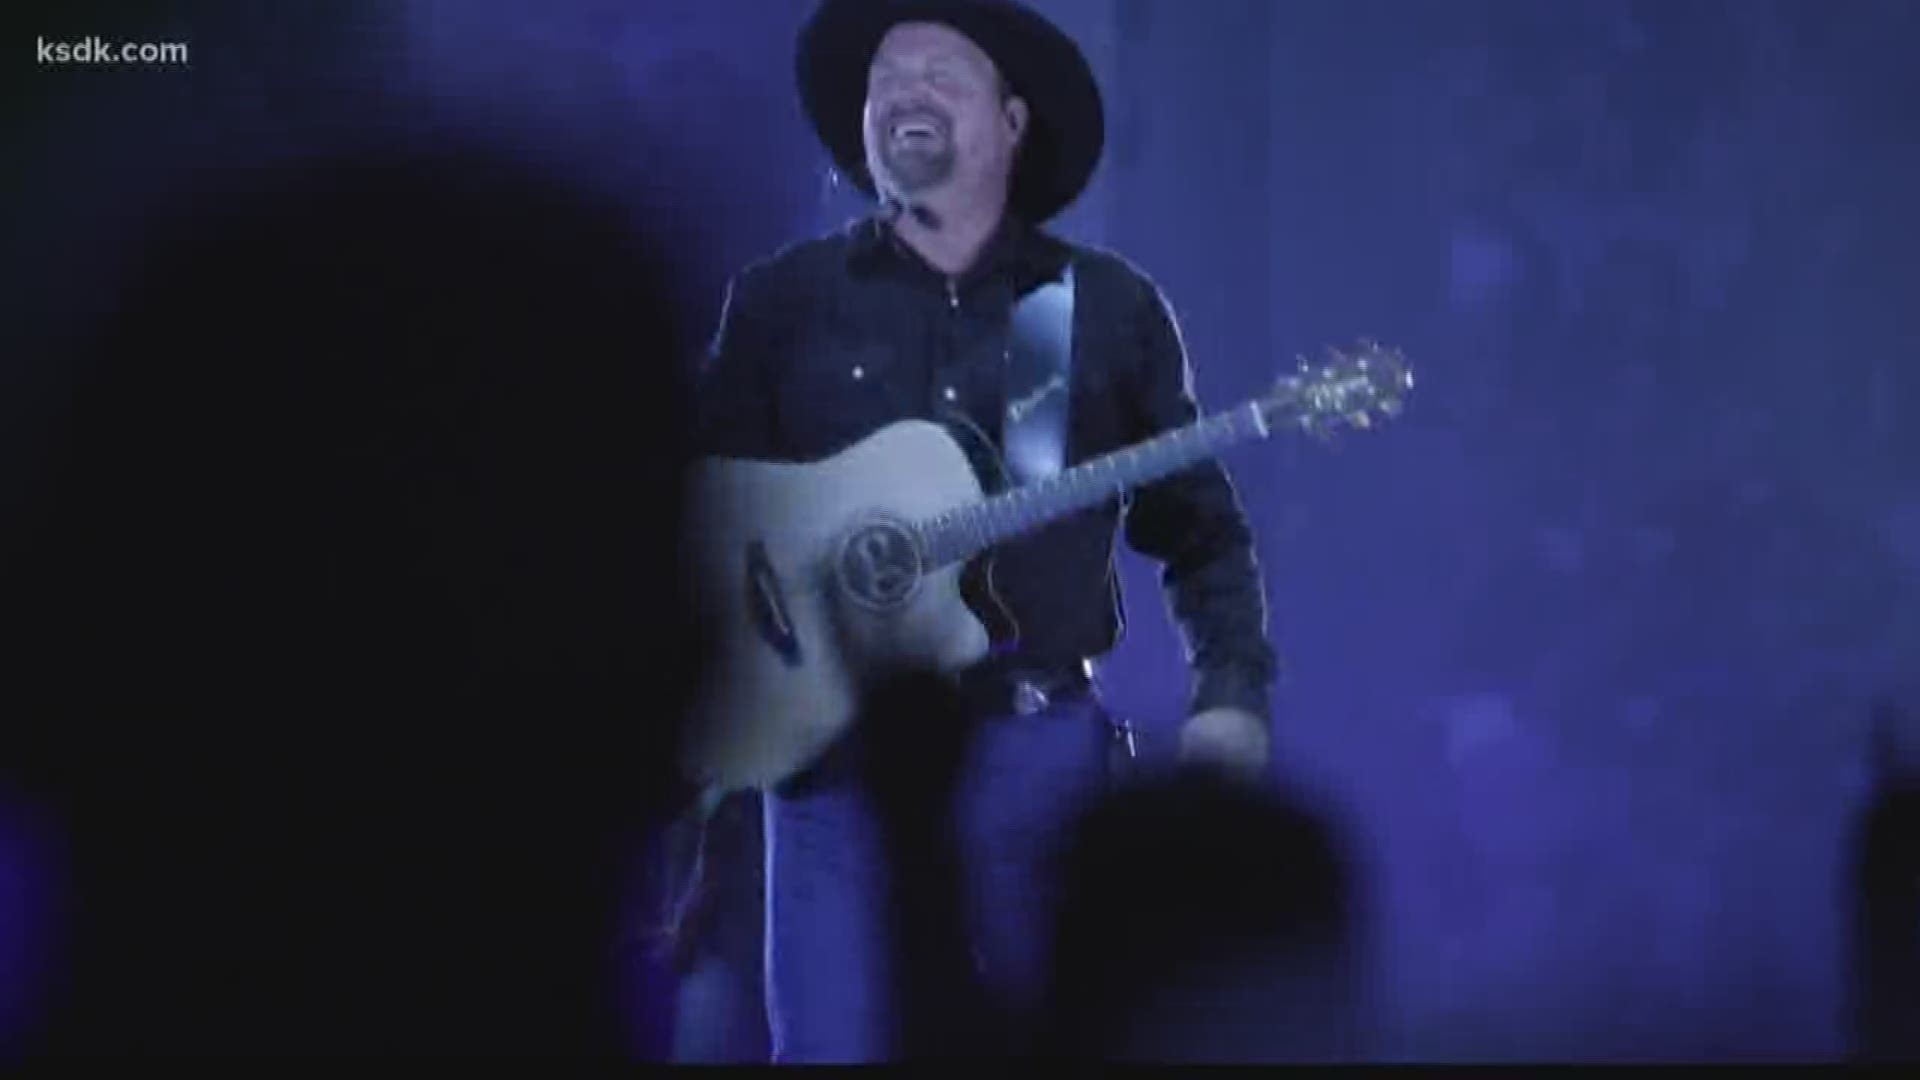 Garth tipped his hat to Doyle, the St. Louis man that discovered him, and said “he’s the guy that believed in me when I first moved to Nashville, I love this cat.”